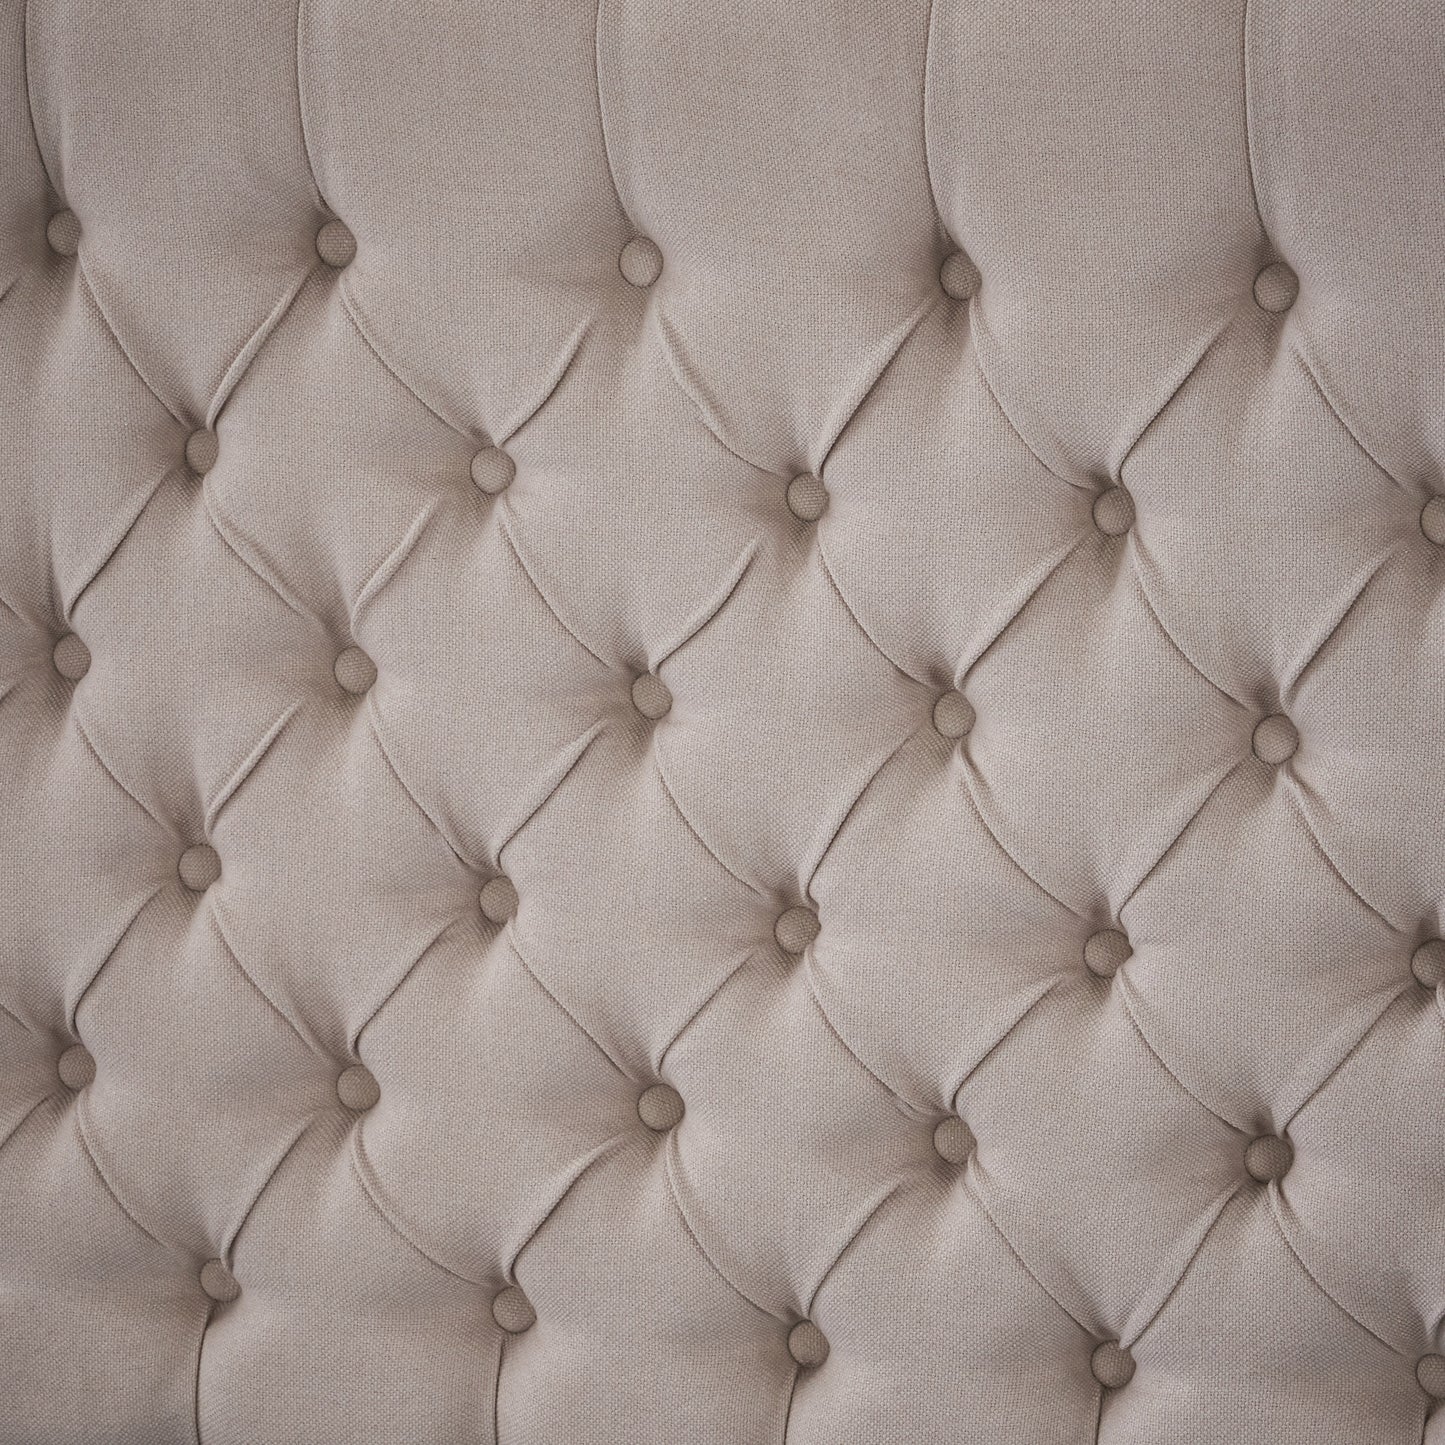 Cumulus Fully Upholstered Fabric Queen Bed